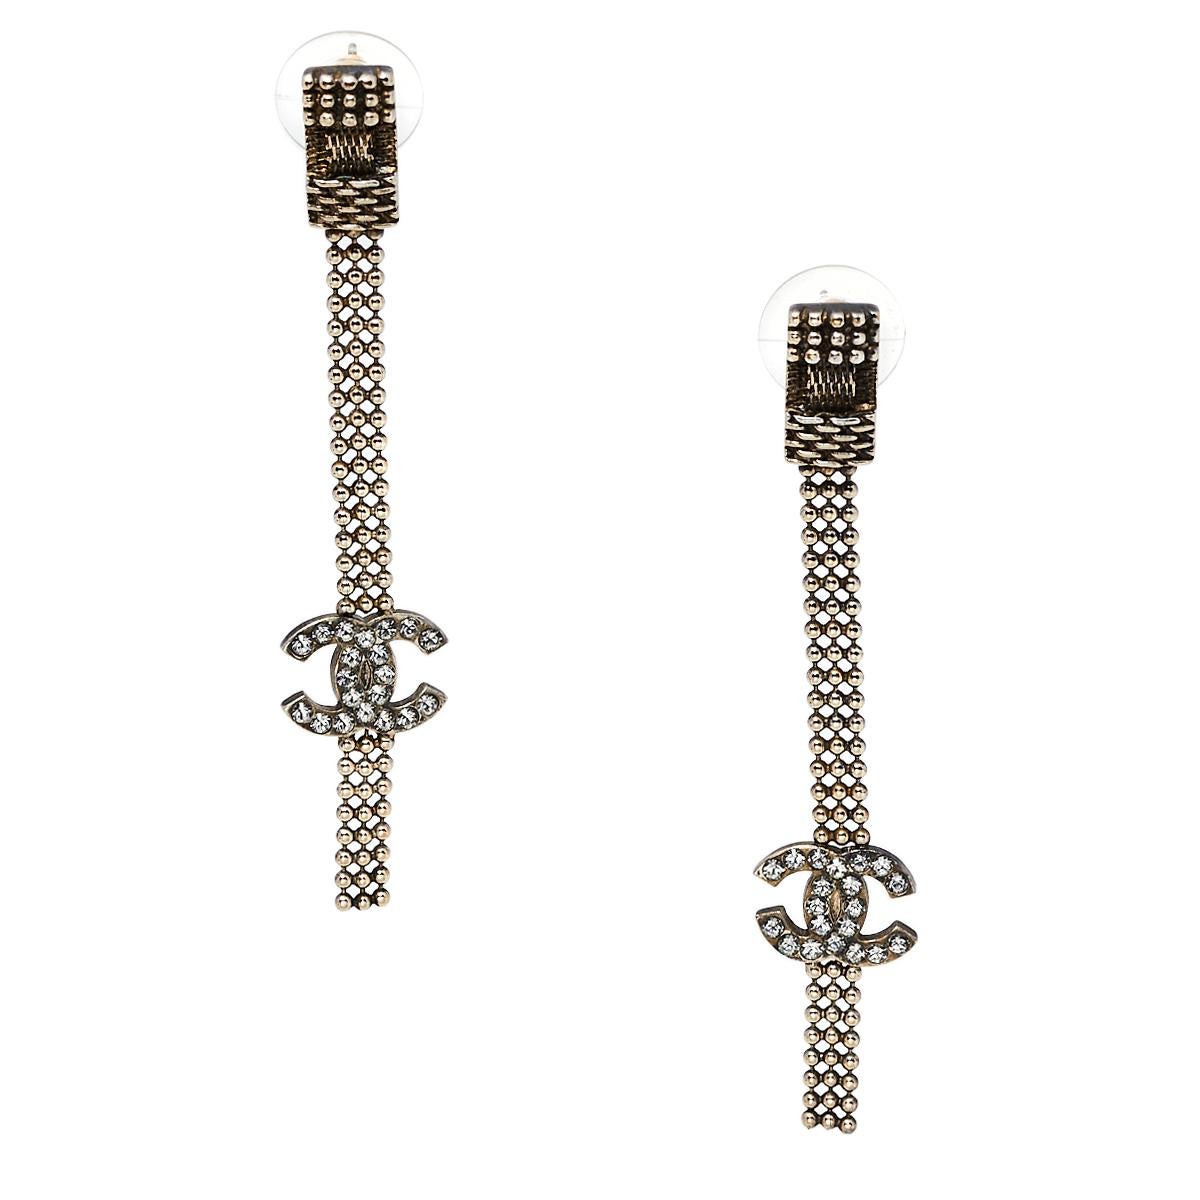 Chanel's elegant charm is evident in this pair of gold-tone chain tassel earrings. Detailed with a crystal-embellished CC logo on the tassels, these earrings are complete with pushback fastening.

